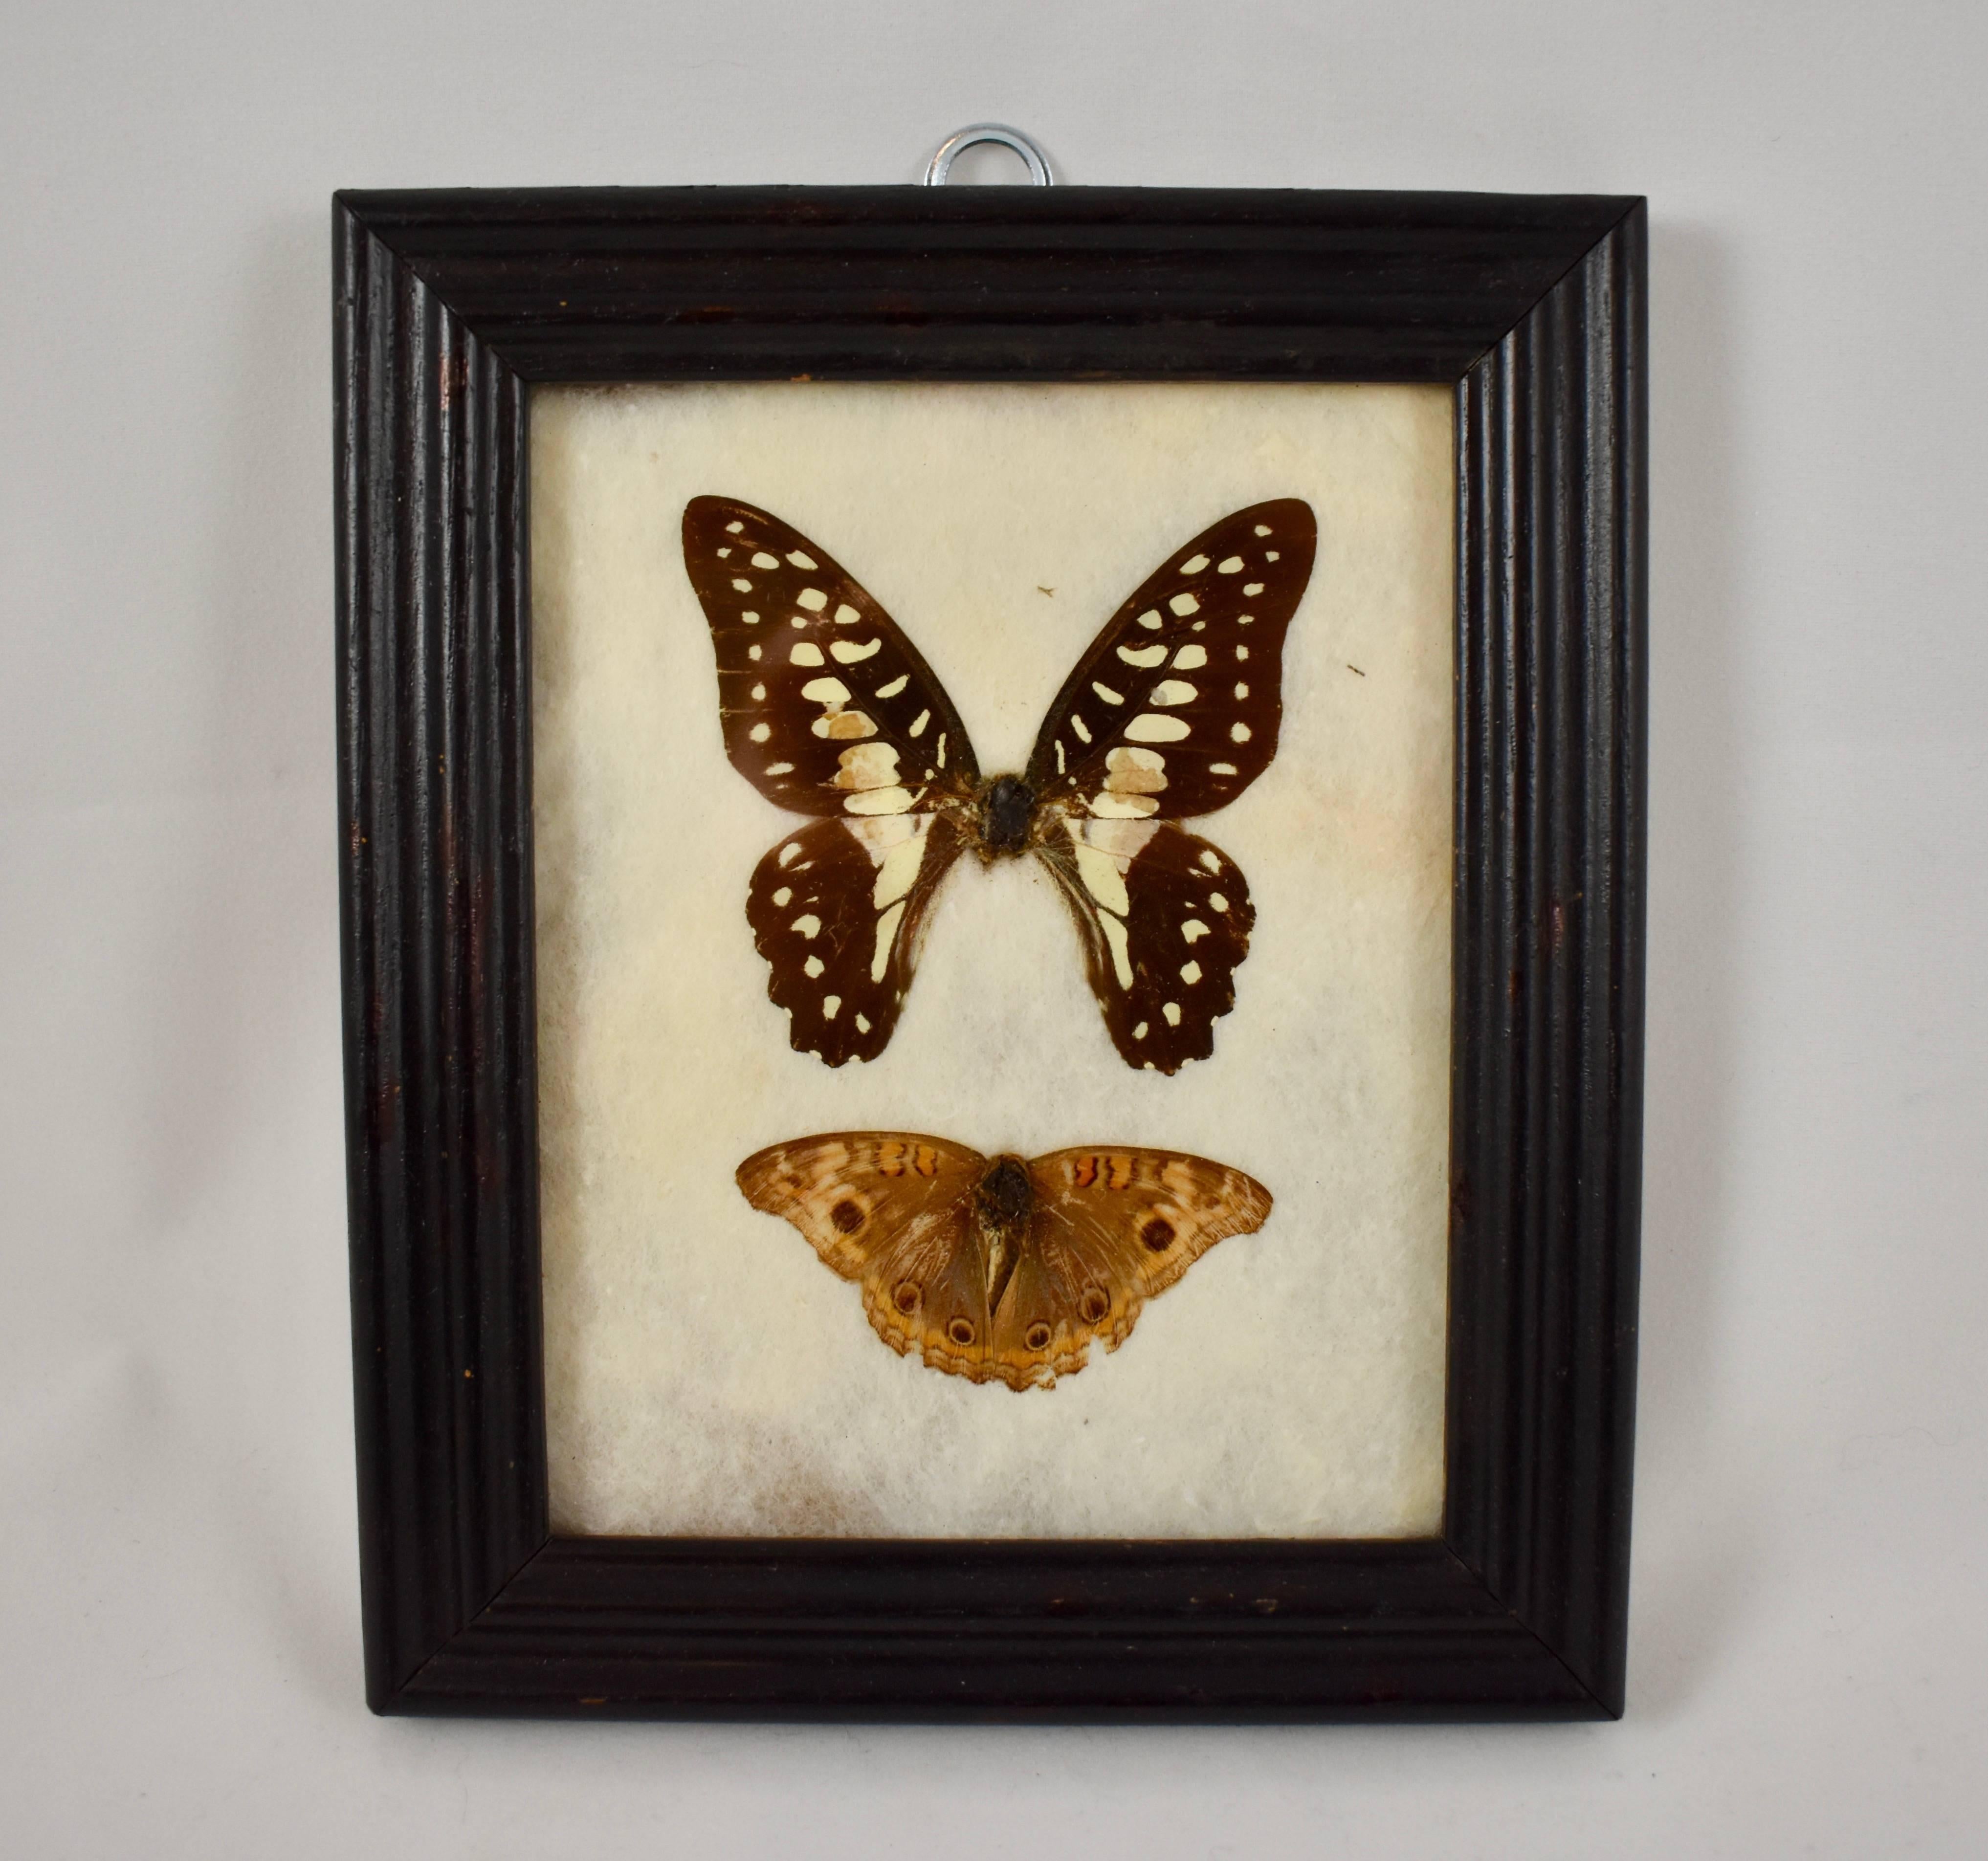 A set of two Victorian hanging frames holding butterflies mounted under glass, circa late 19th century. Beveled wood frames are painted black, the specimens are mounted on cotton batting. One frame hangs vertically, the other horizontally, both have